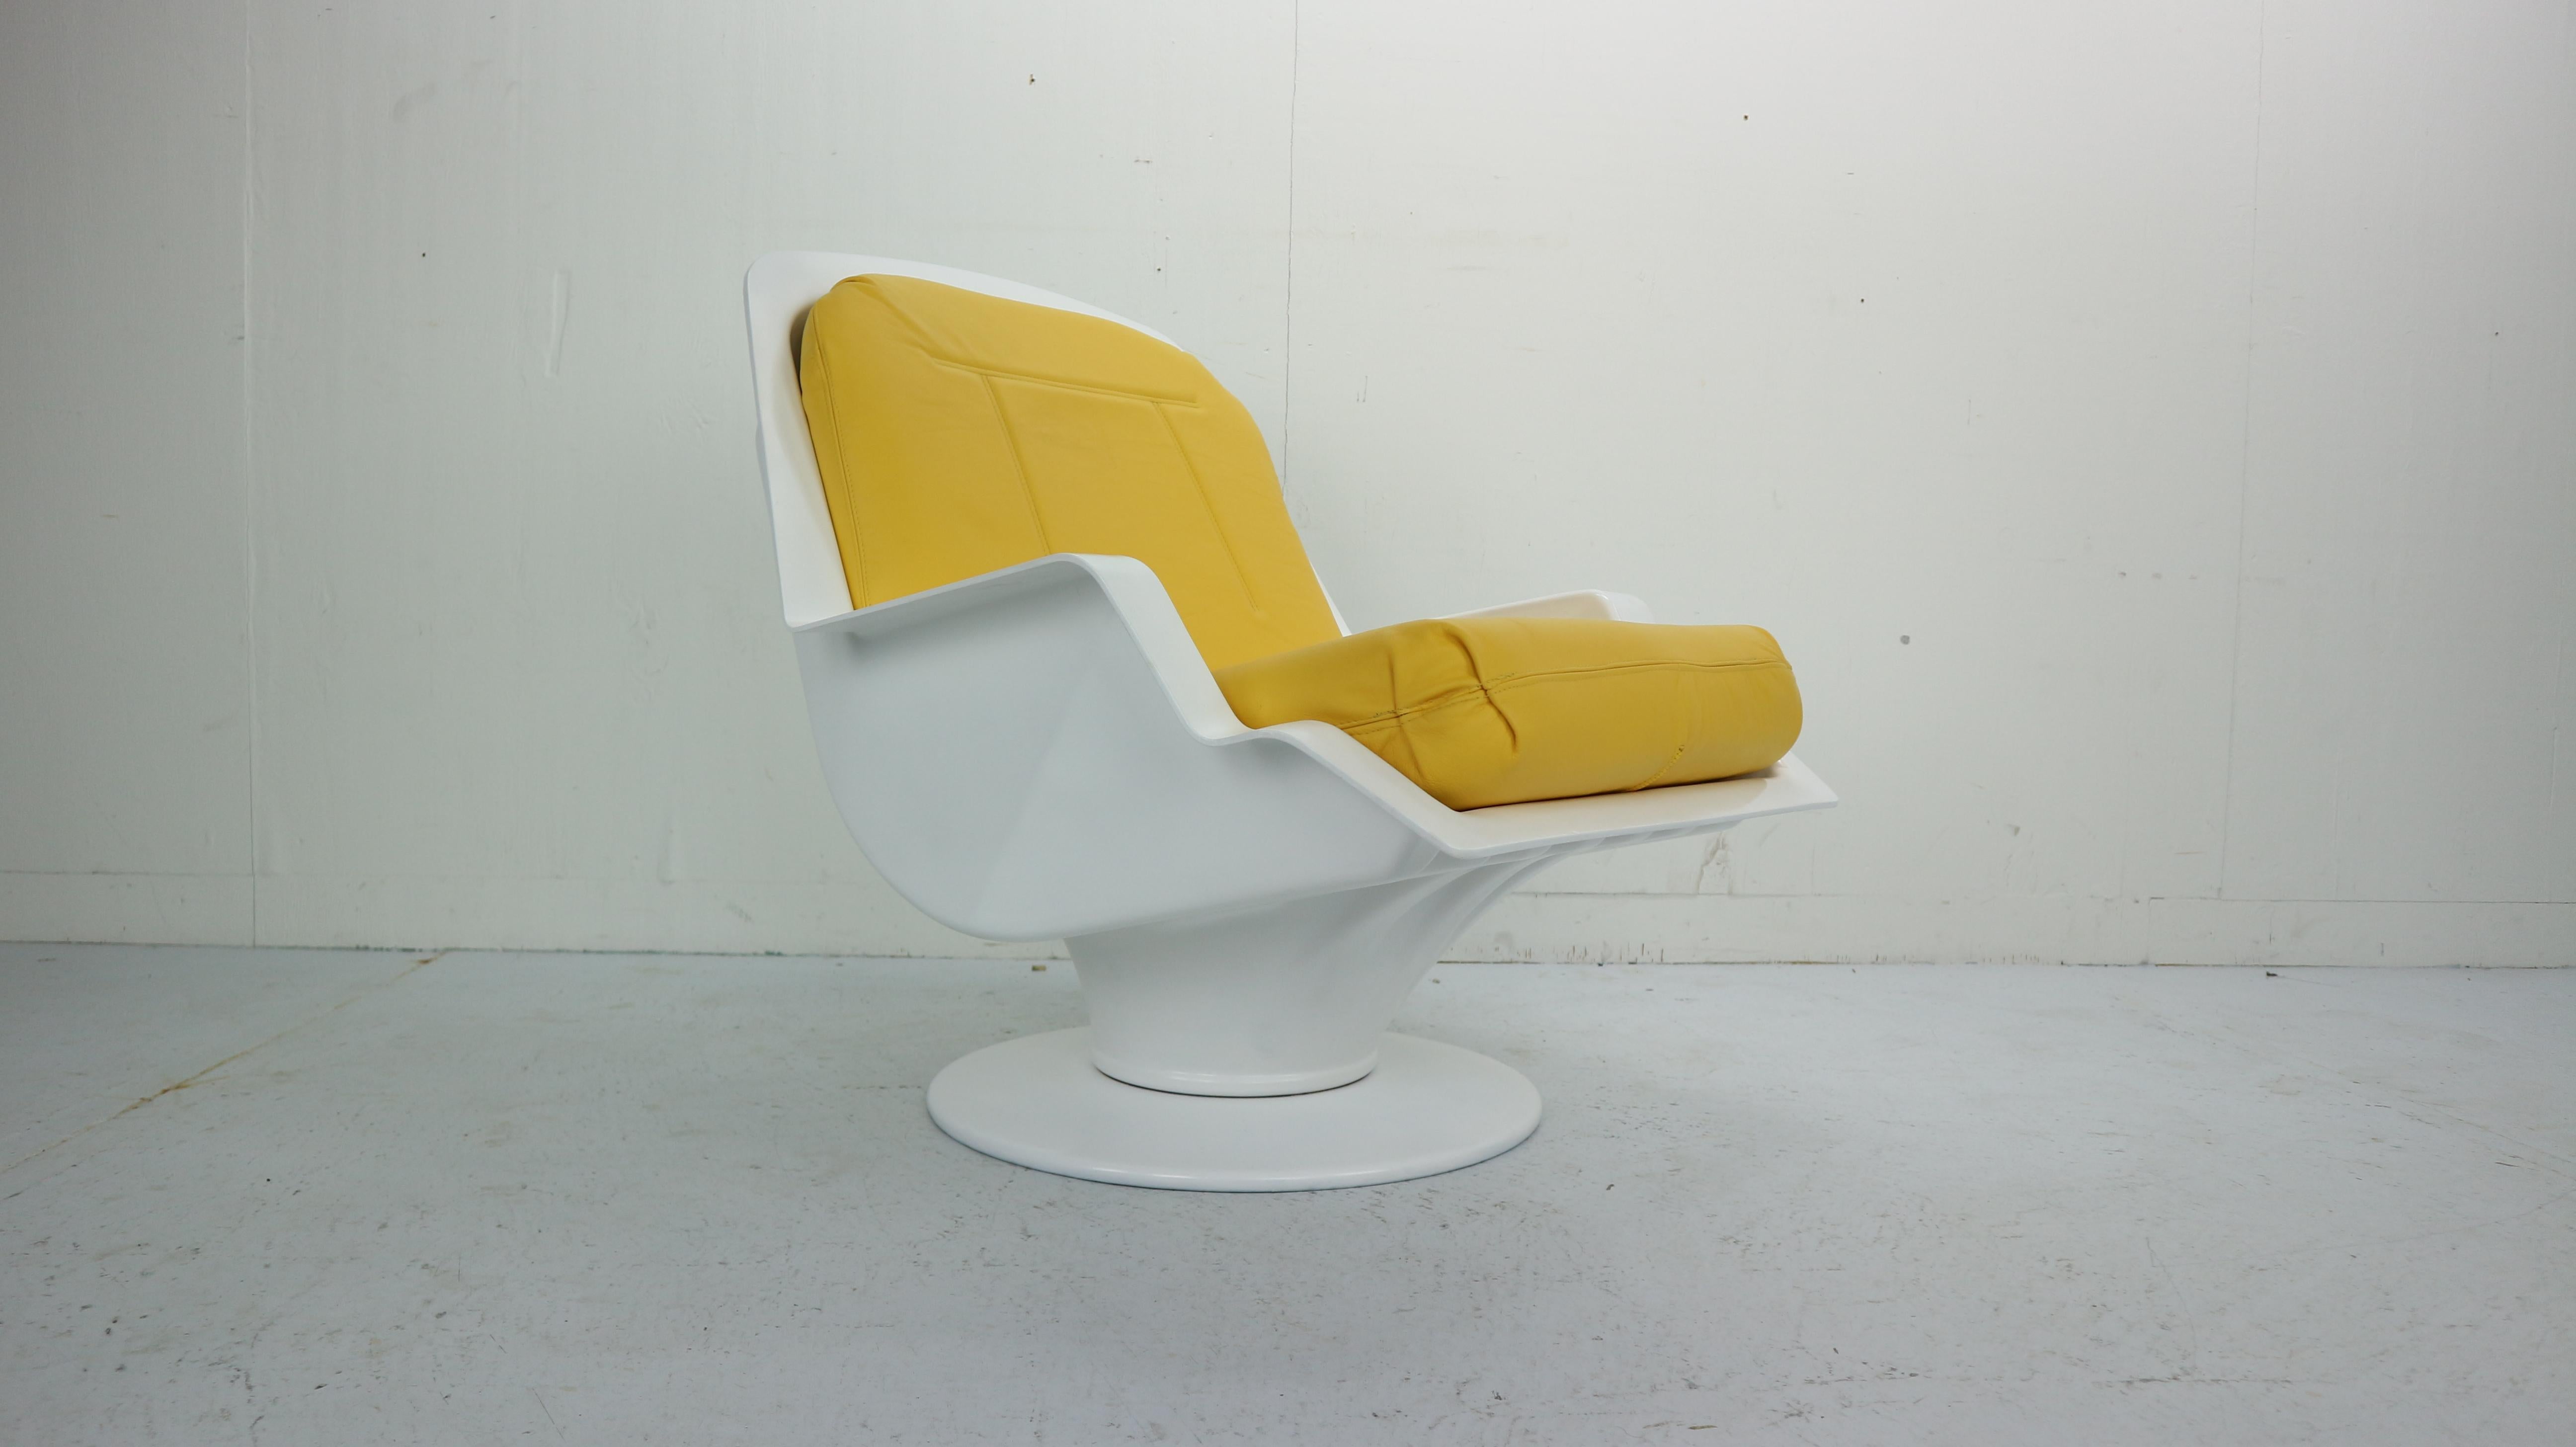 NIKE lounge chair designed by Richard Neagle and produced by Luigi Sormani in 1966, Italy. 
Designed for the Nova project house of future in Disneyland.
White lacquered polyester and metal frame with yellow colour newly upholstered leather